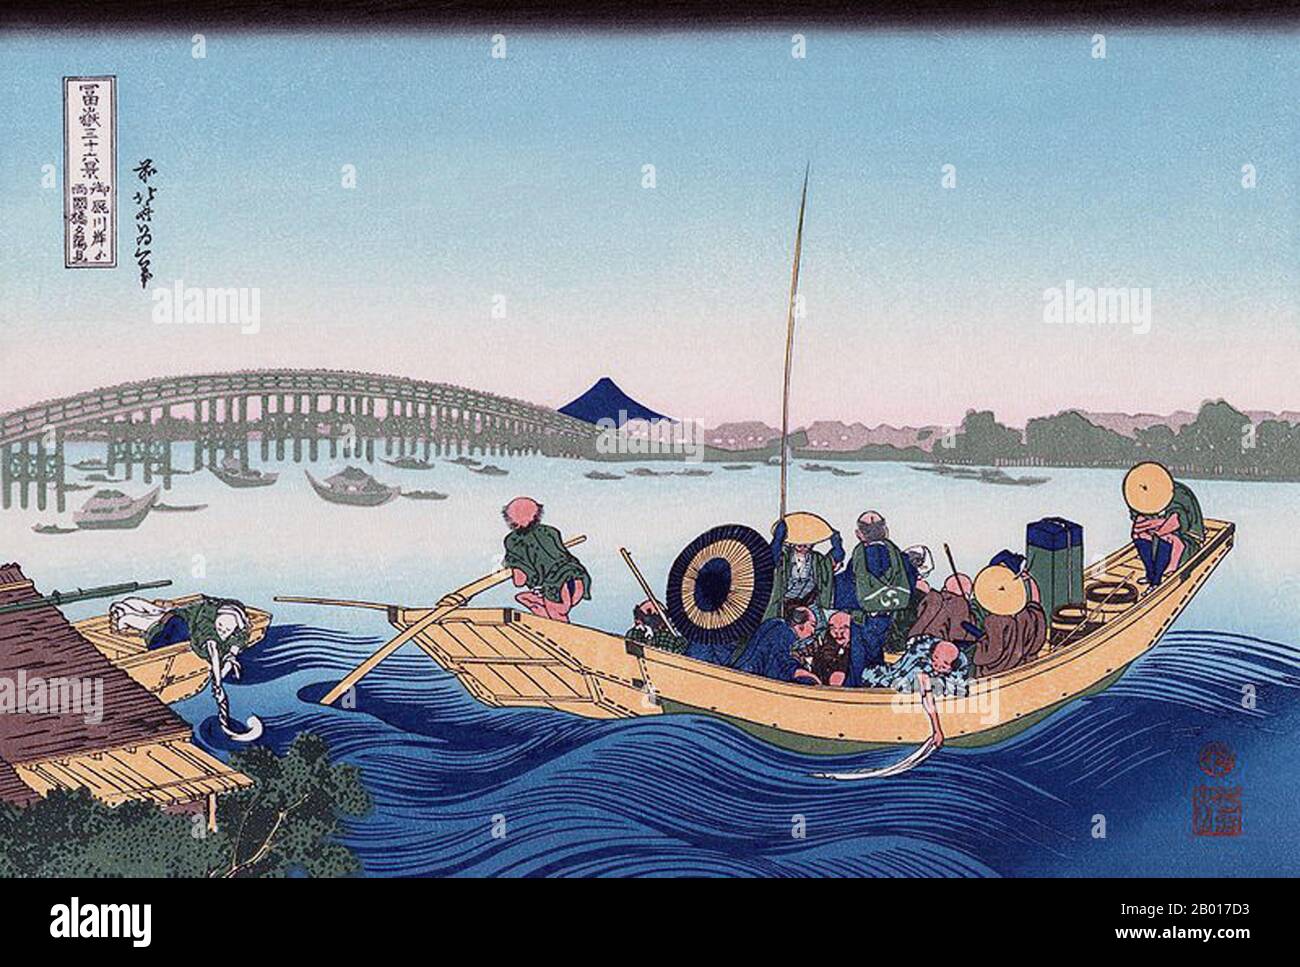 Japan: ‘Sunset Across the Ryogoku Bridge from the Bank of the Sumida River at Onmayagashi'. Ukiyo-e woodblock print from the series ‘Thirty-Six Views of Mount Fuji’ by Katsushika Hokusai (31 October 1760 - 10 May 1849), 1830.  ‘Thirty-six Views of Mount Fuji’ is an ‘ukiyo-e’ series of woodcut prints by Japanese artist Katsushika Hokusai. The series depicts Mount Fuji in differing seasons and weather conditions from a variety of places and distances. It actually consists of 46 prints created between 1826 and 1833. The first 36 were included in the original publication and 10 more were added. Stock Photo